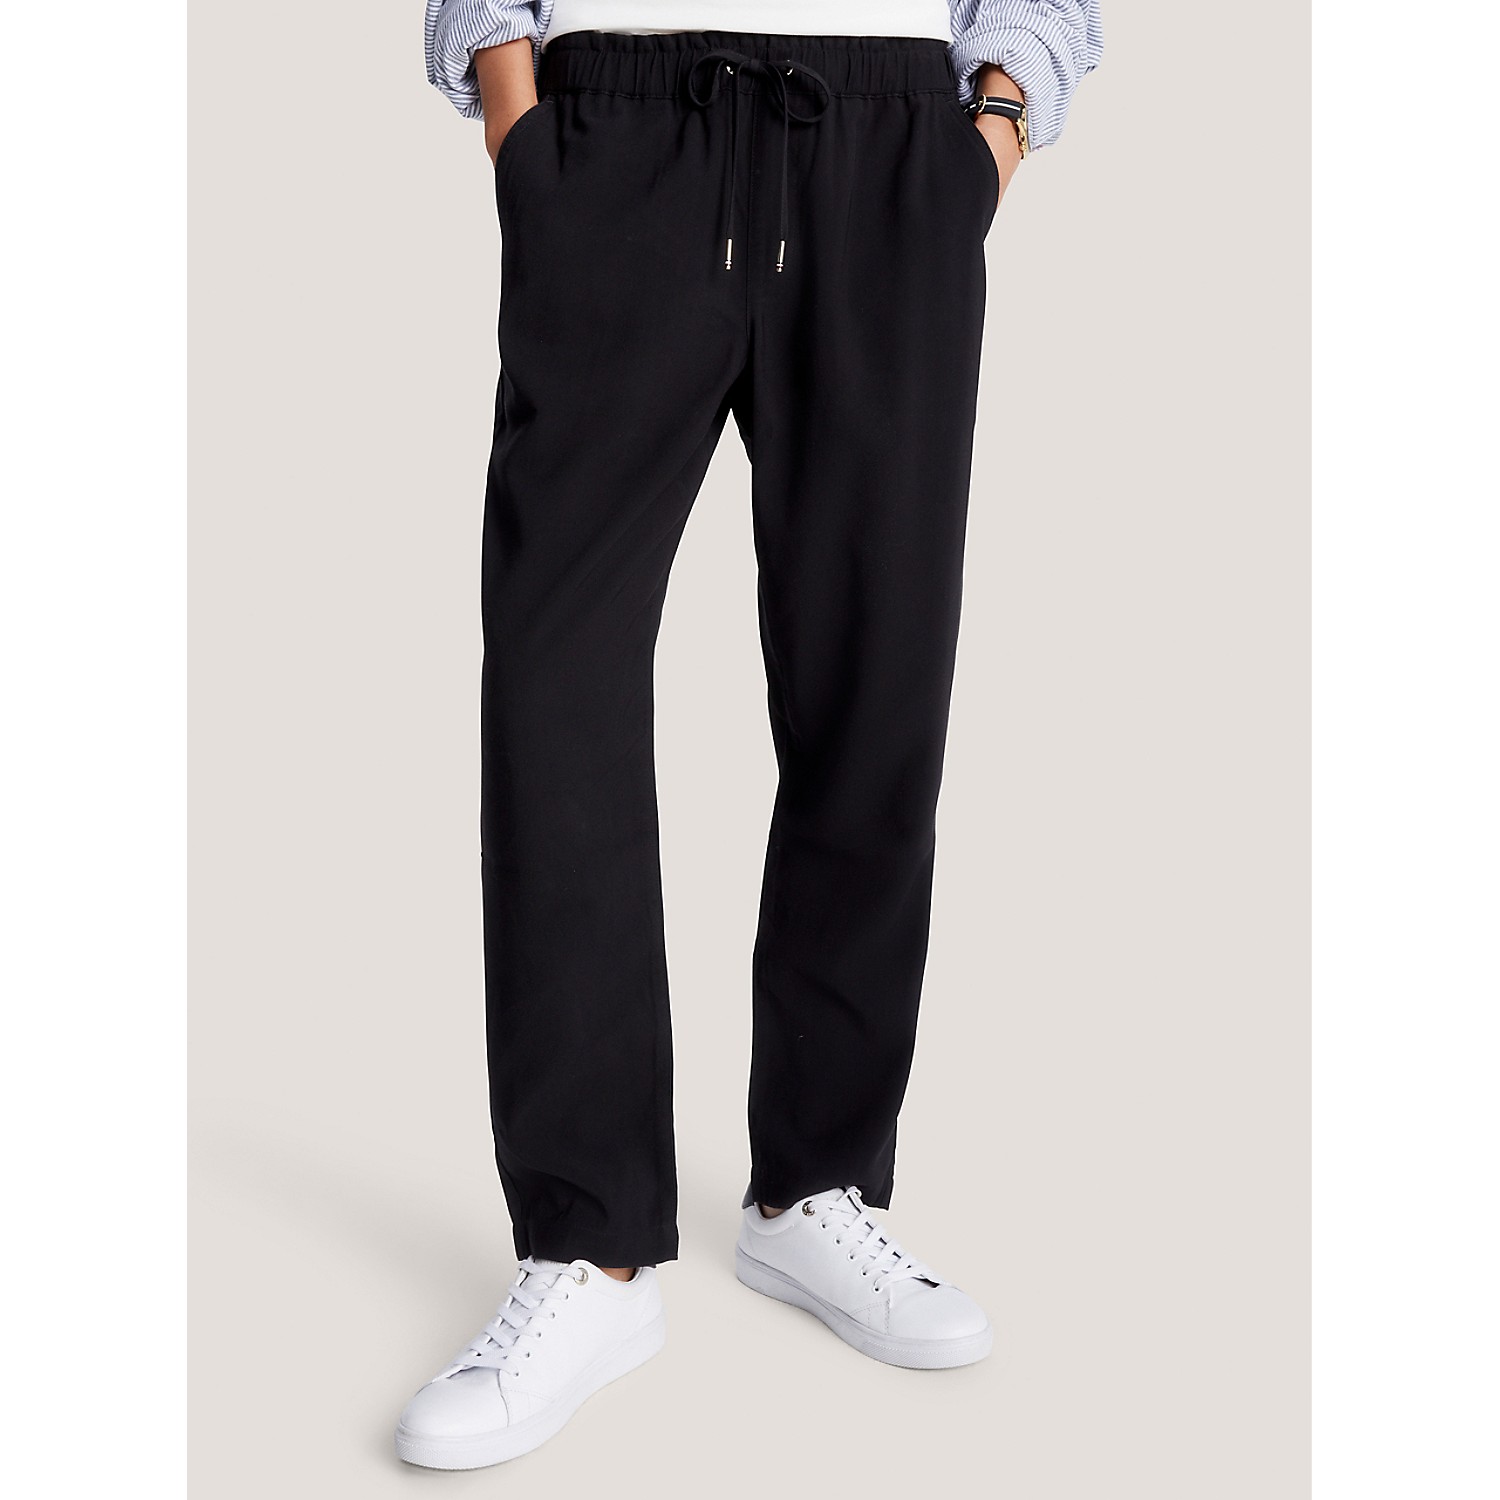 TOMMY HILFIGER Tapered Drawstring Pant